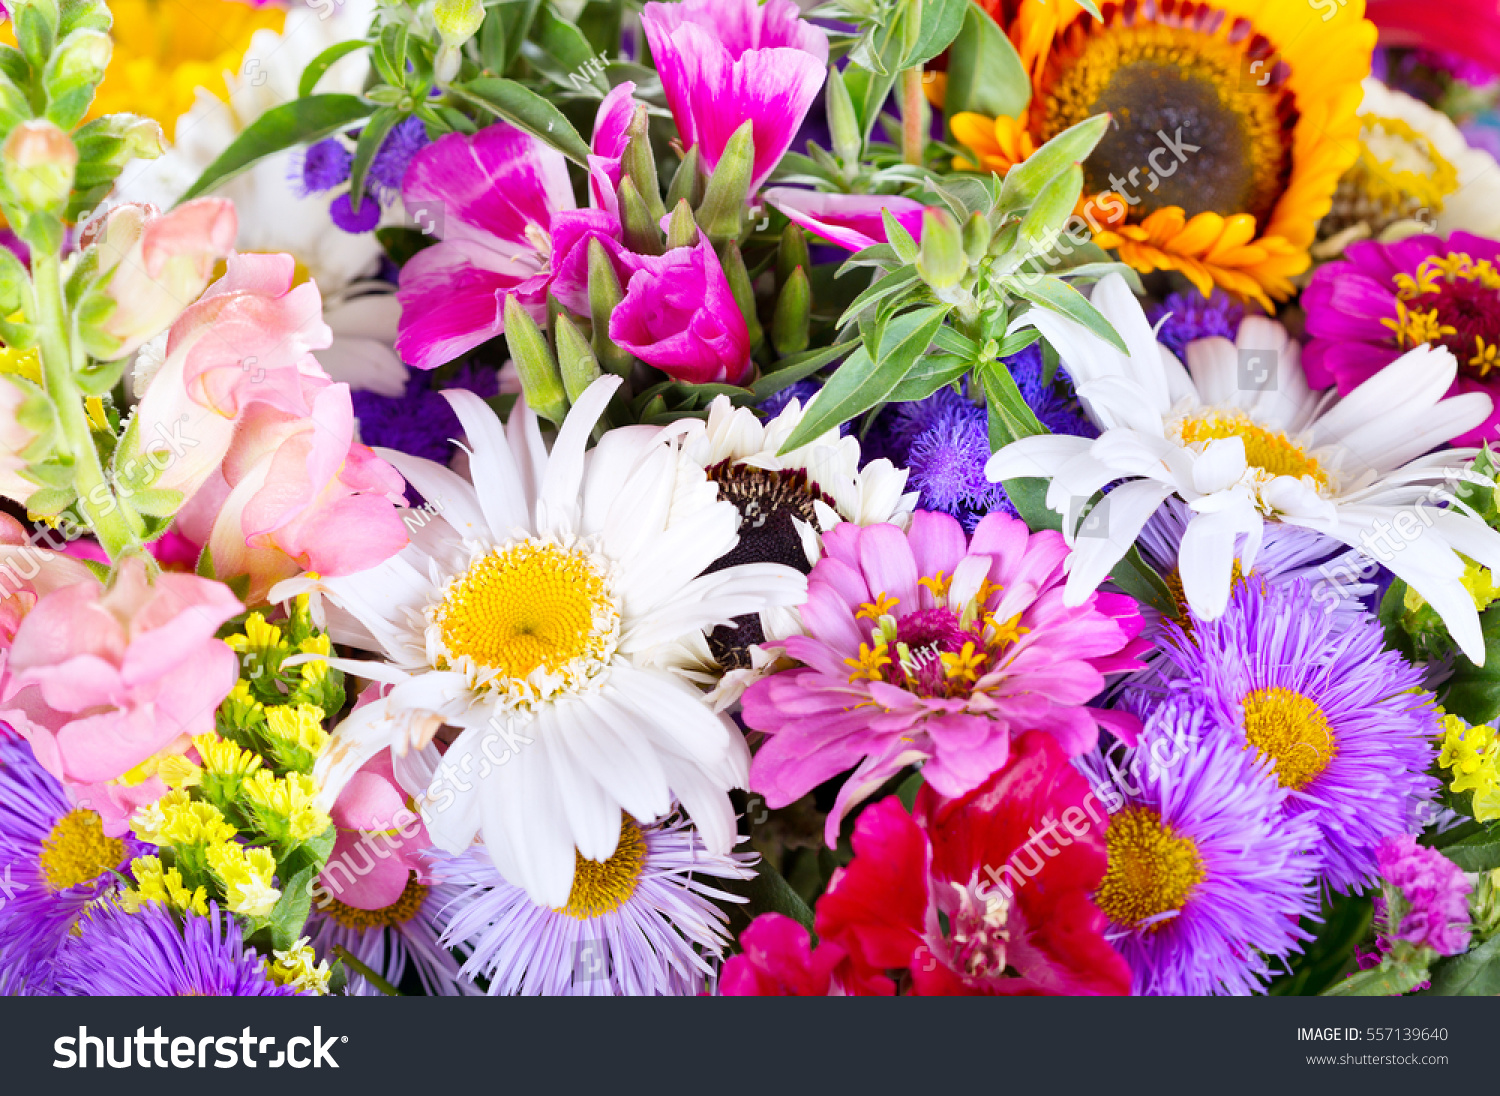 close up of bouquet of various summer flowers as background. #557139640